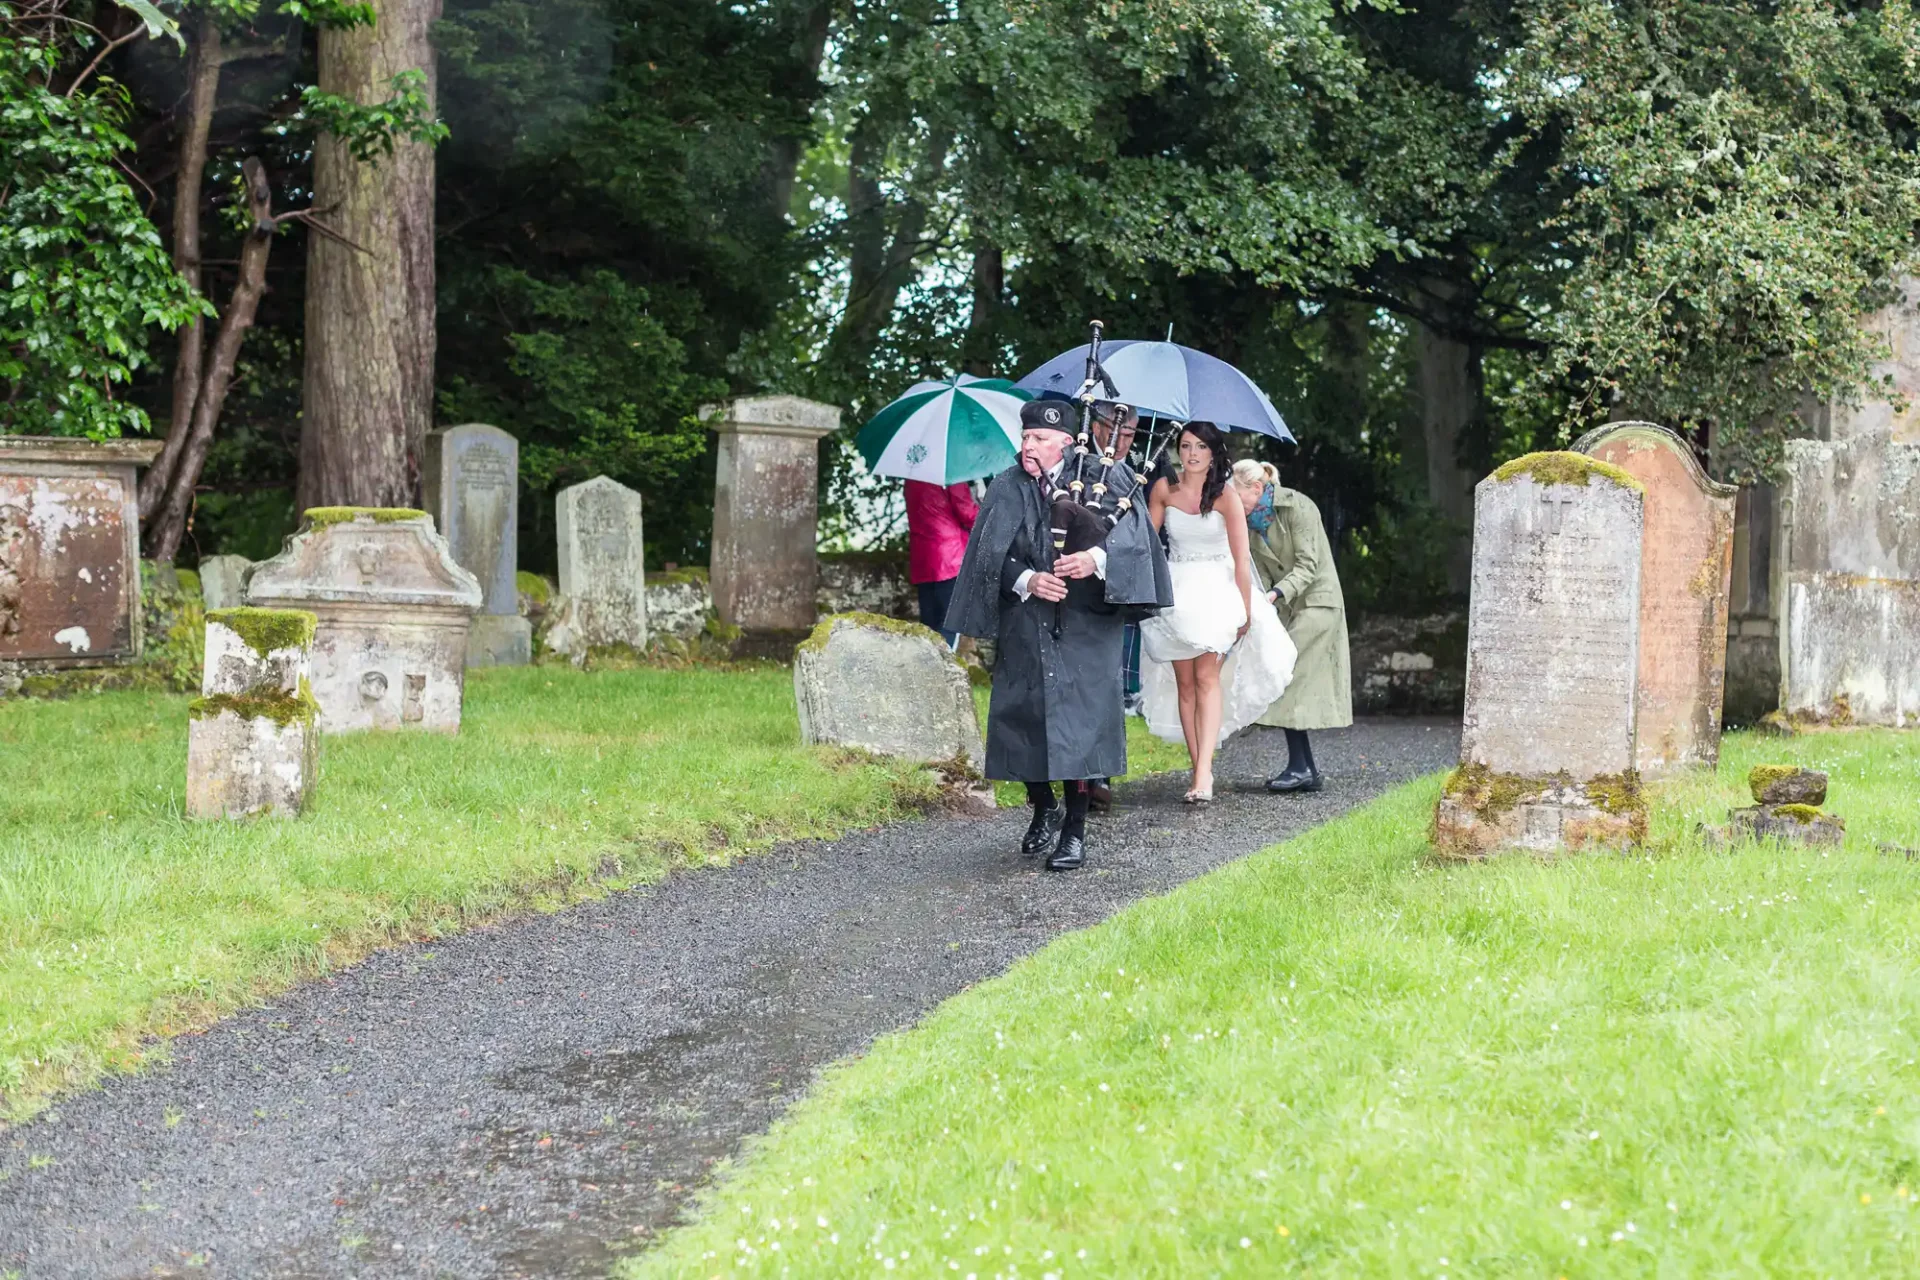 People walking on a cemetery path with umbrellas on a rainy day, dressed for a formal event amidst old tombstones.